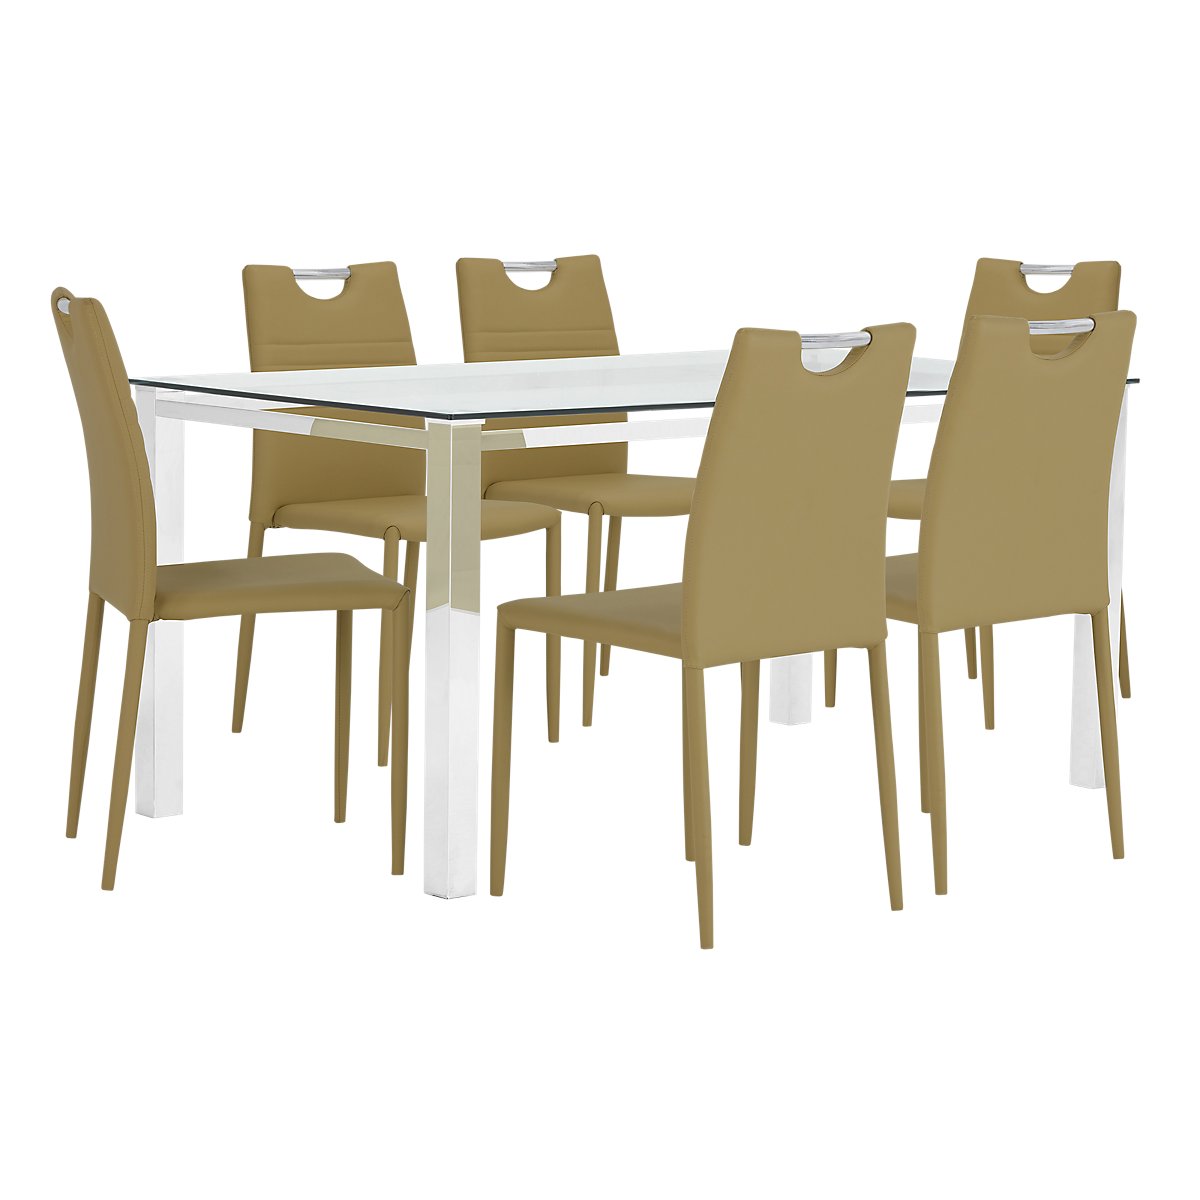 Skyline Light Green Rect Table & 4 Upholstered Chairs | Dining Room